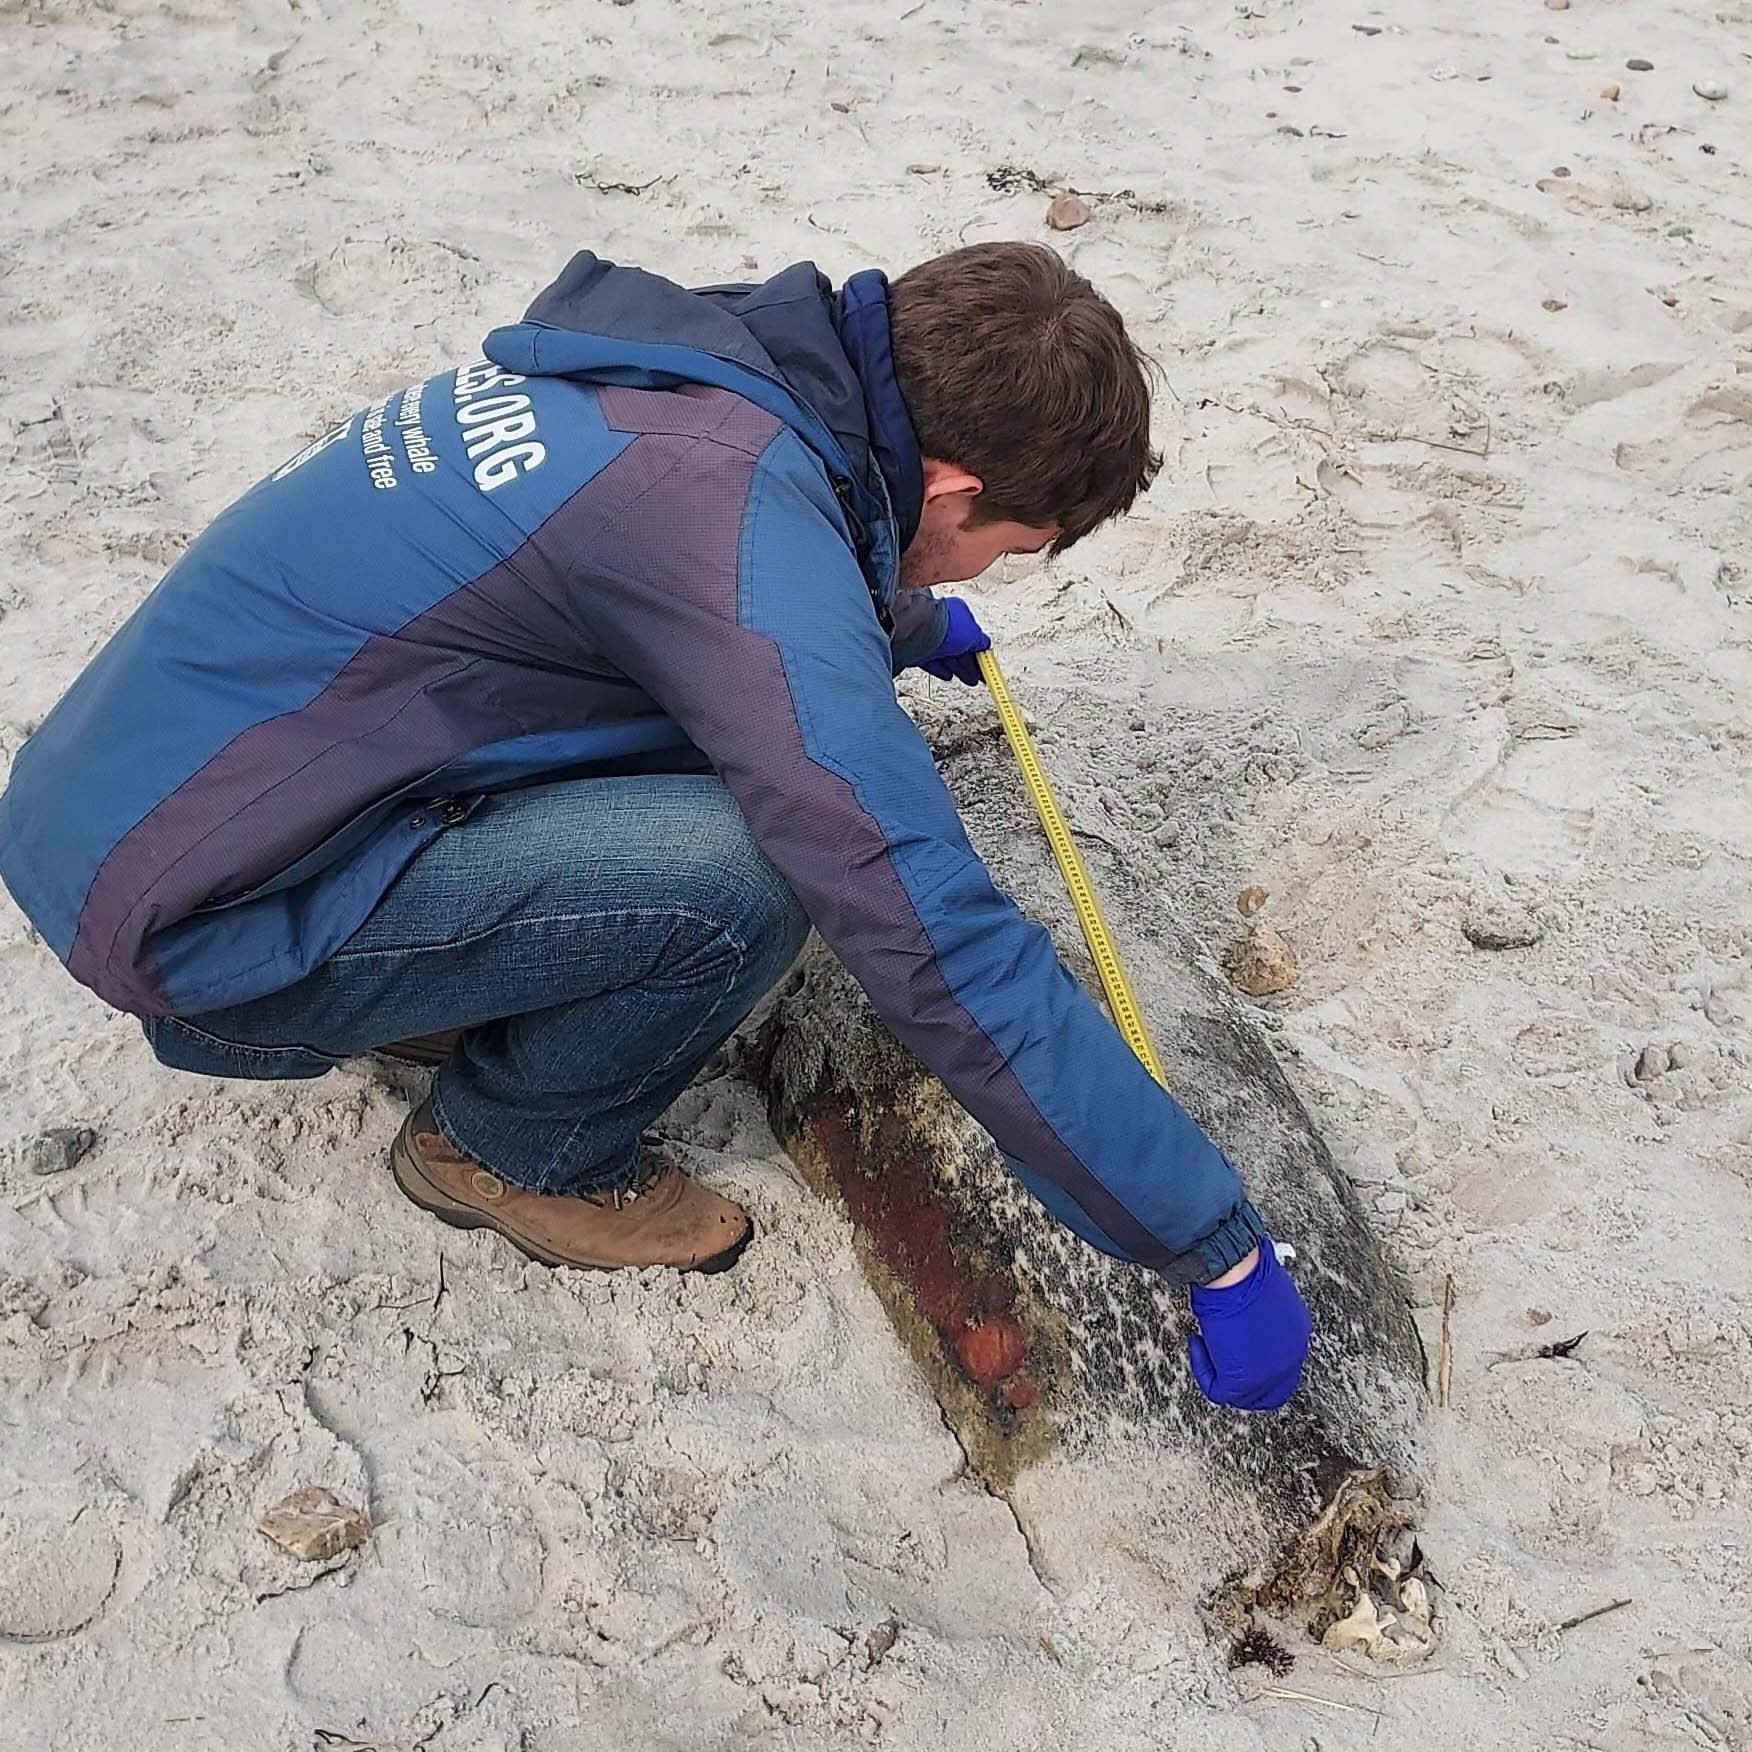 WDC Marine Animal Rescue and Response Intern, JJ Cruz, measures a deceased harbor seal under authorization from NOAA